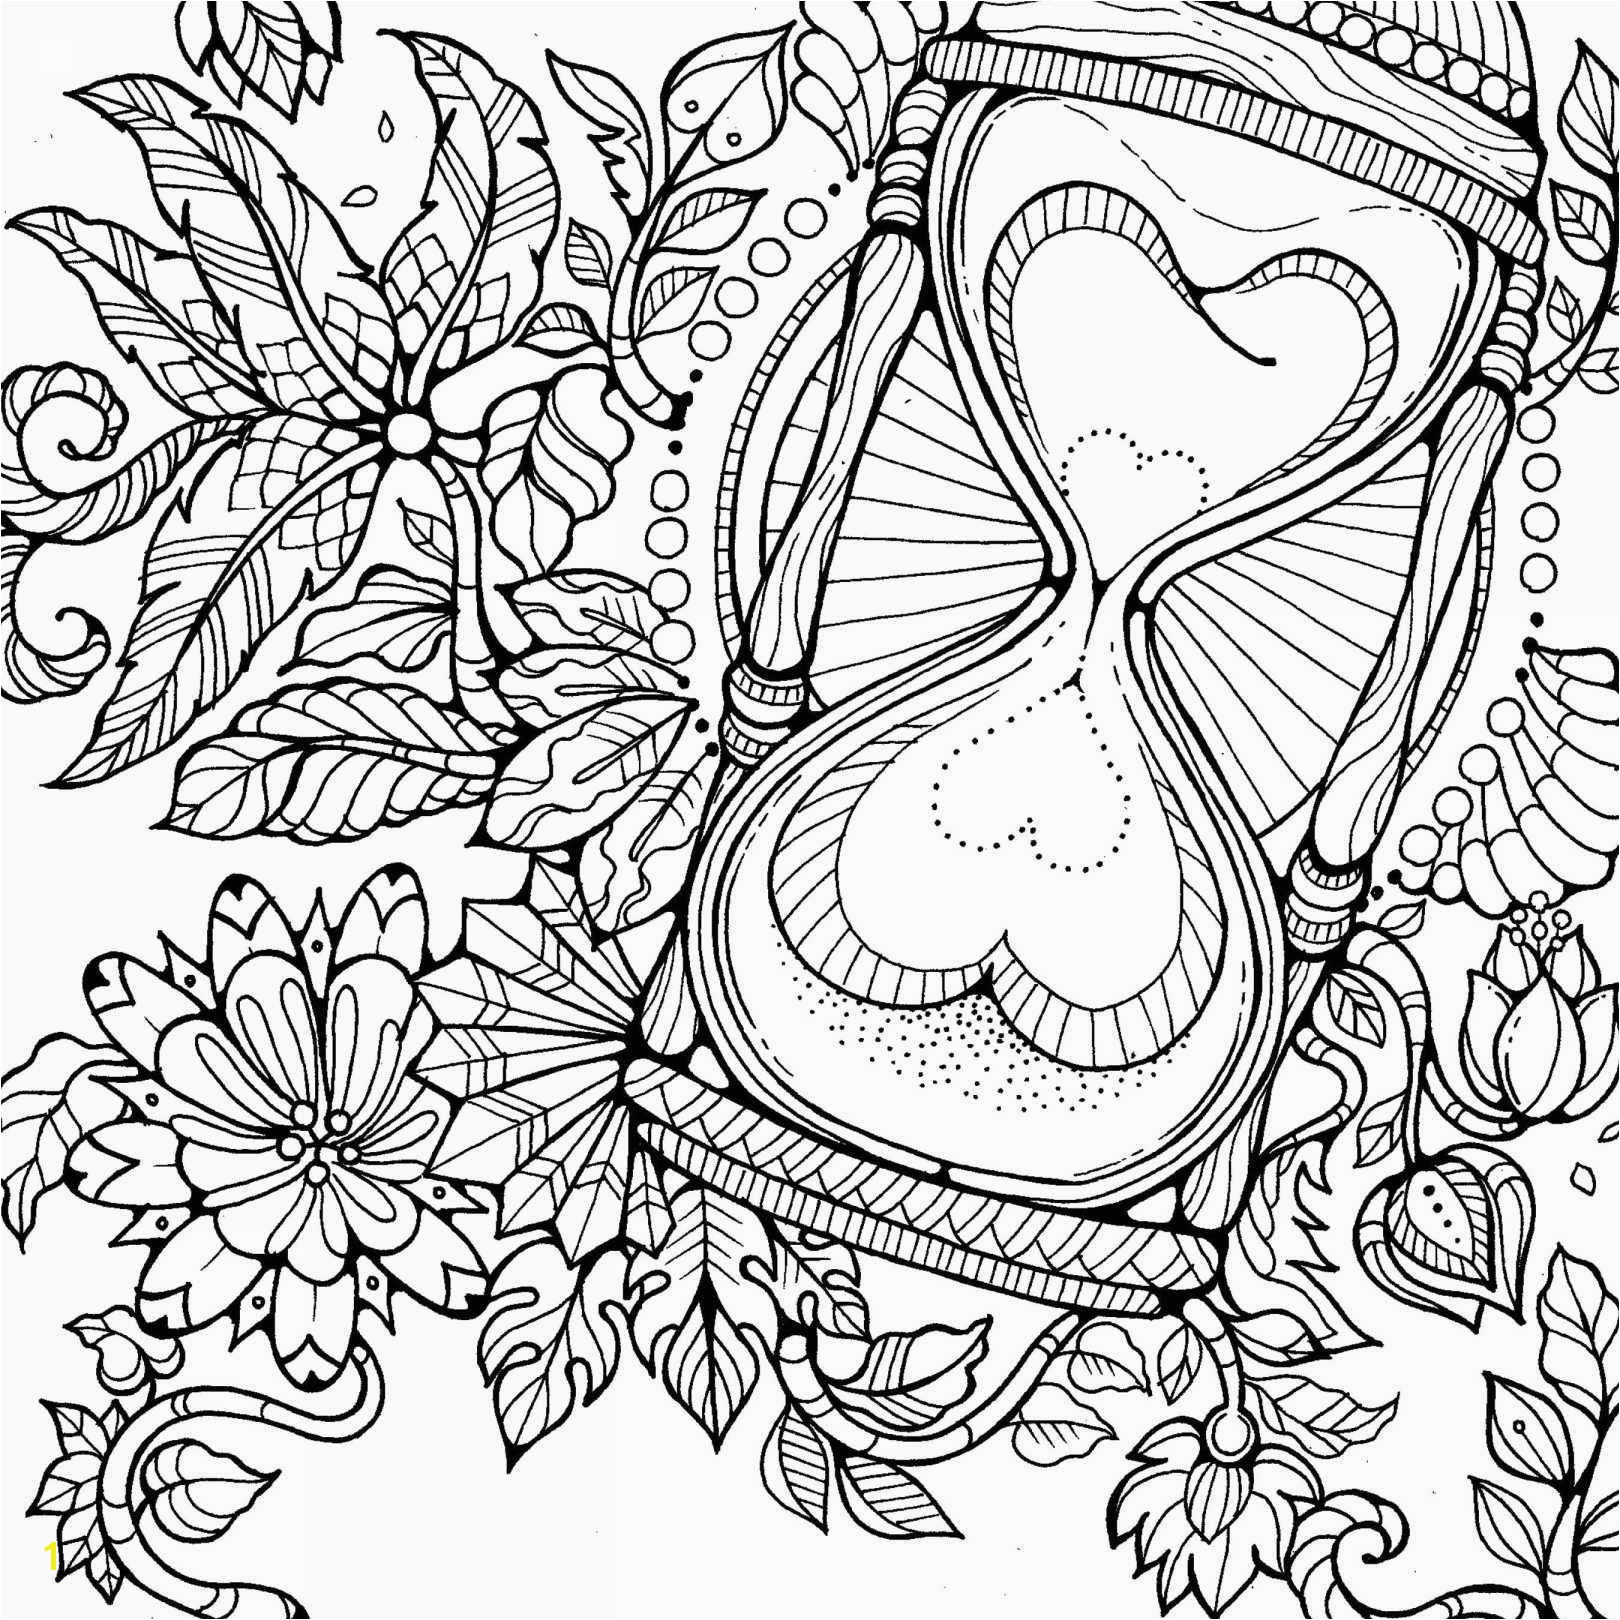 Teenage Girl Coloring Pages Printable 20 Coloring Pages for Teenage Girls Printable